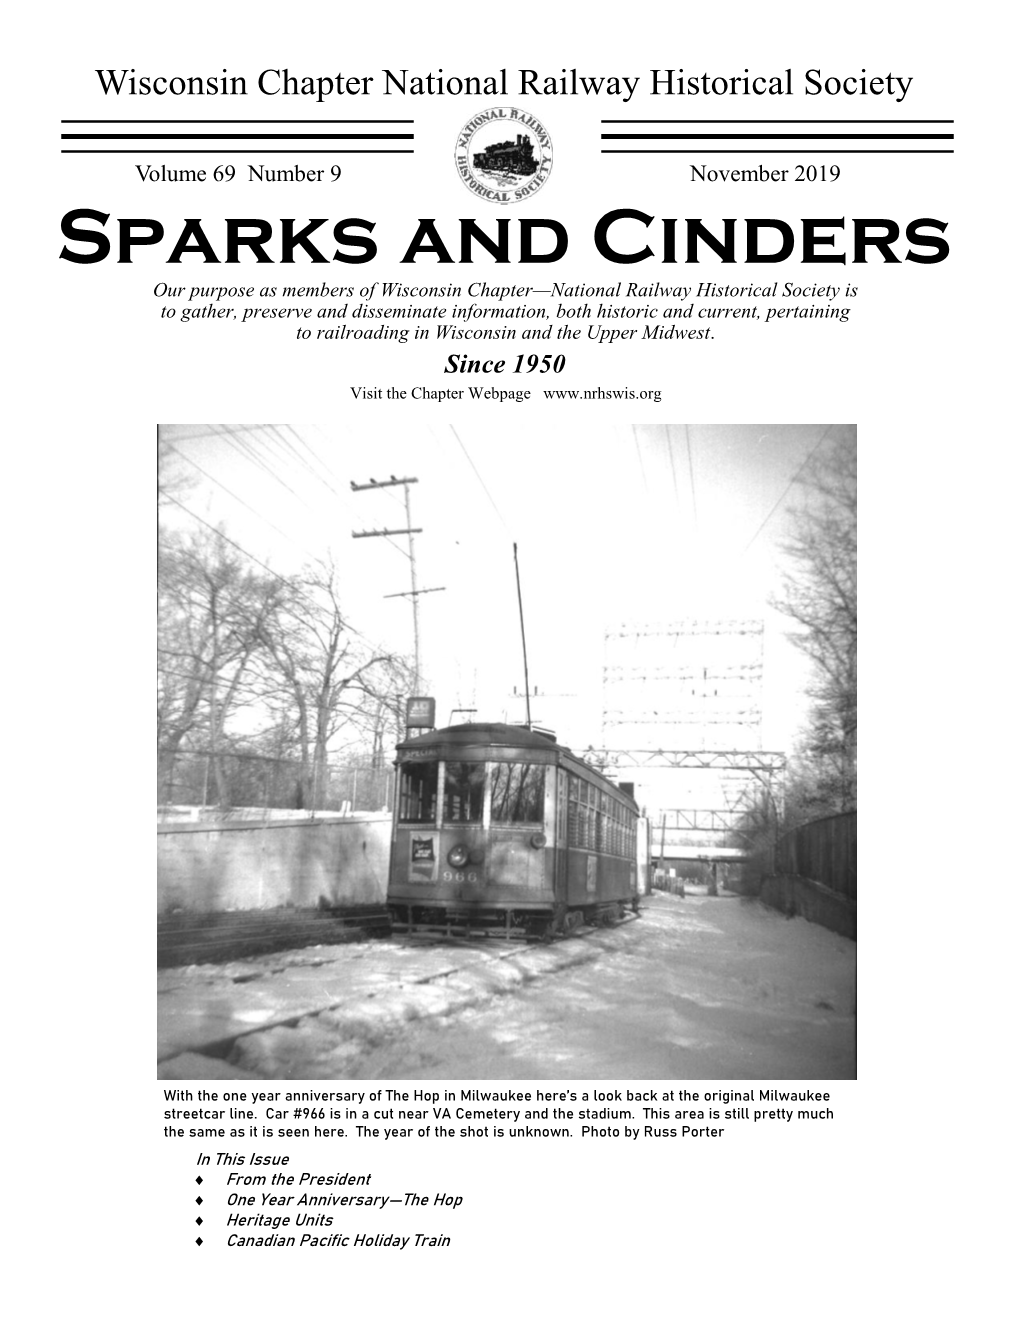 Sparks and Cinders